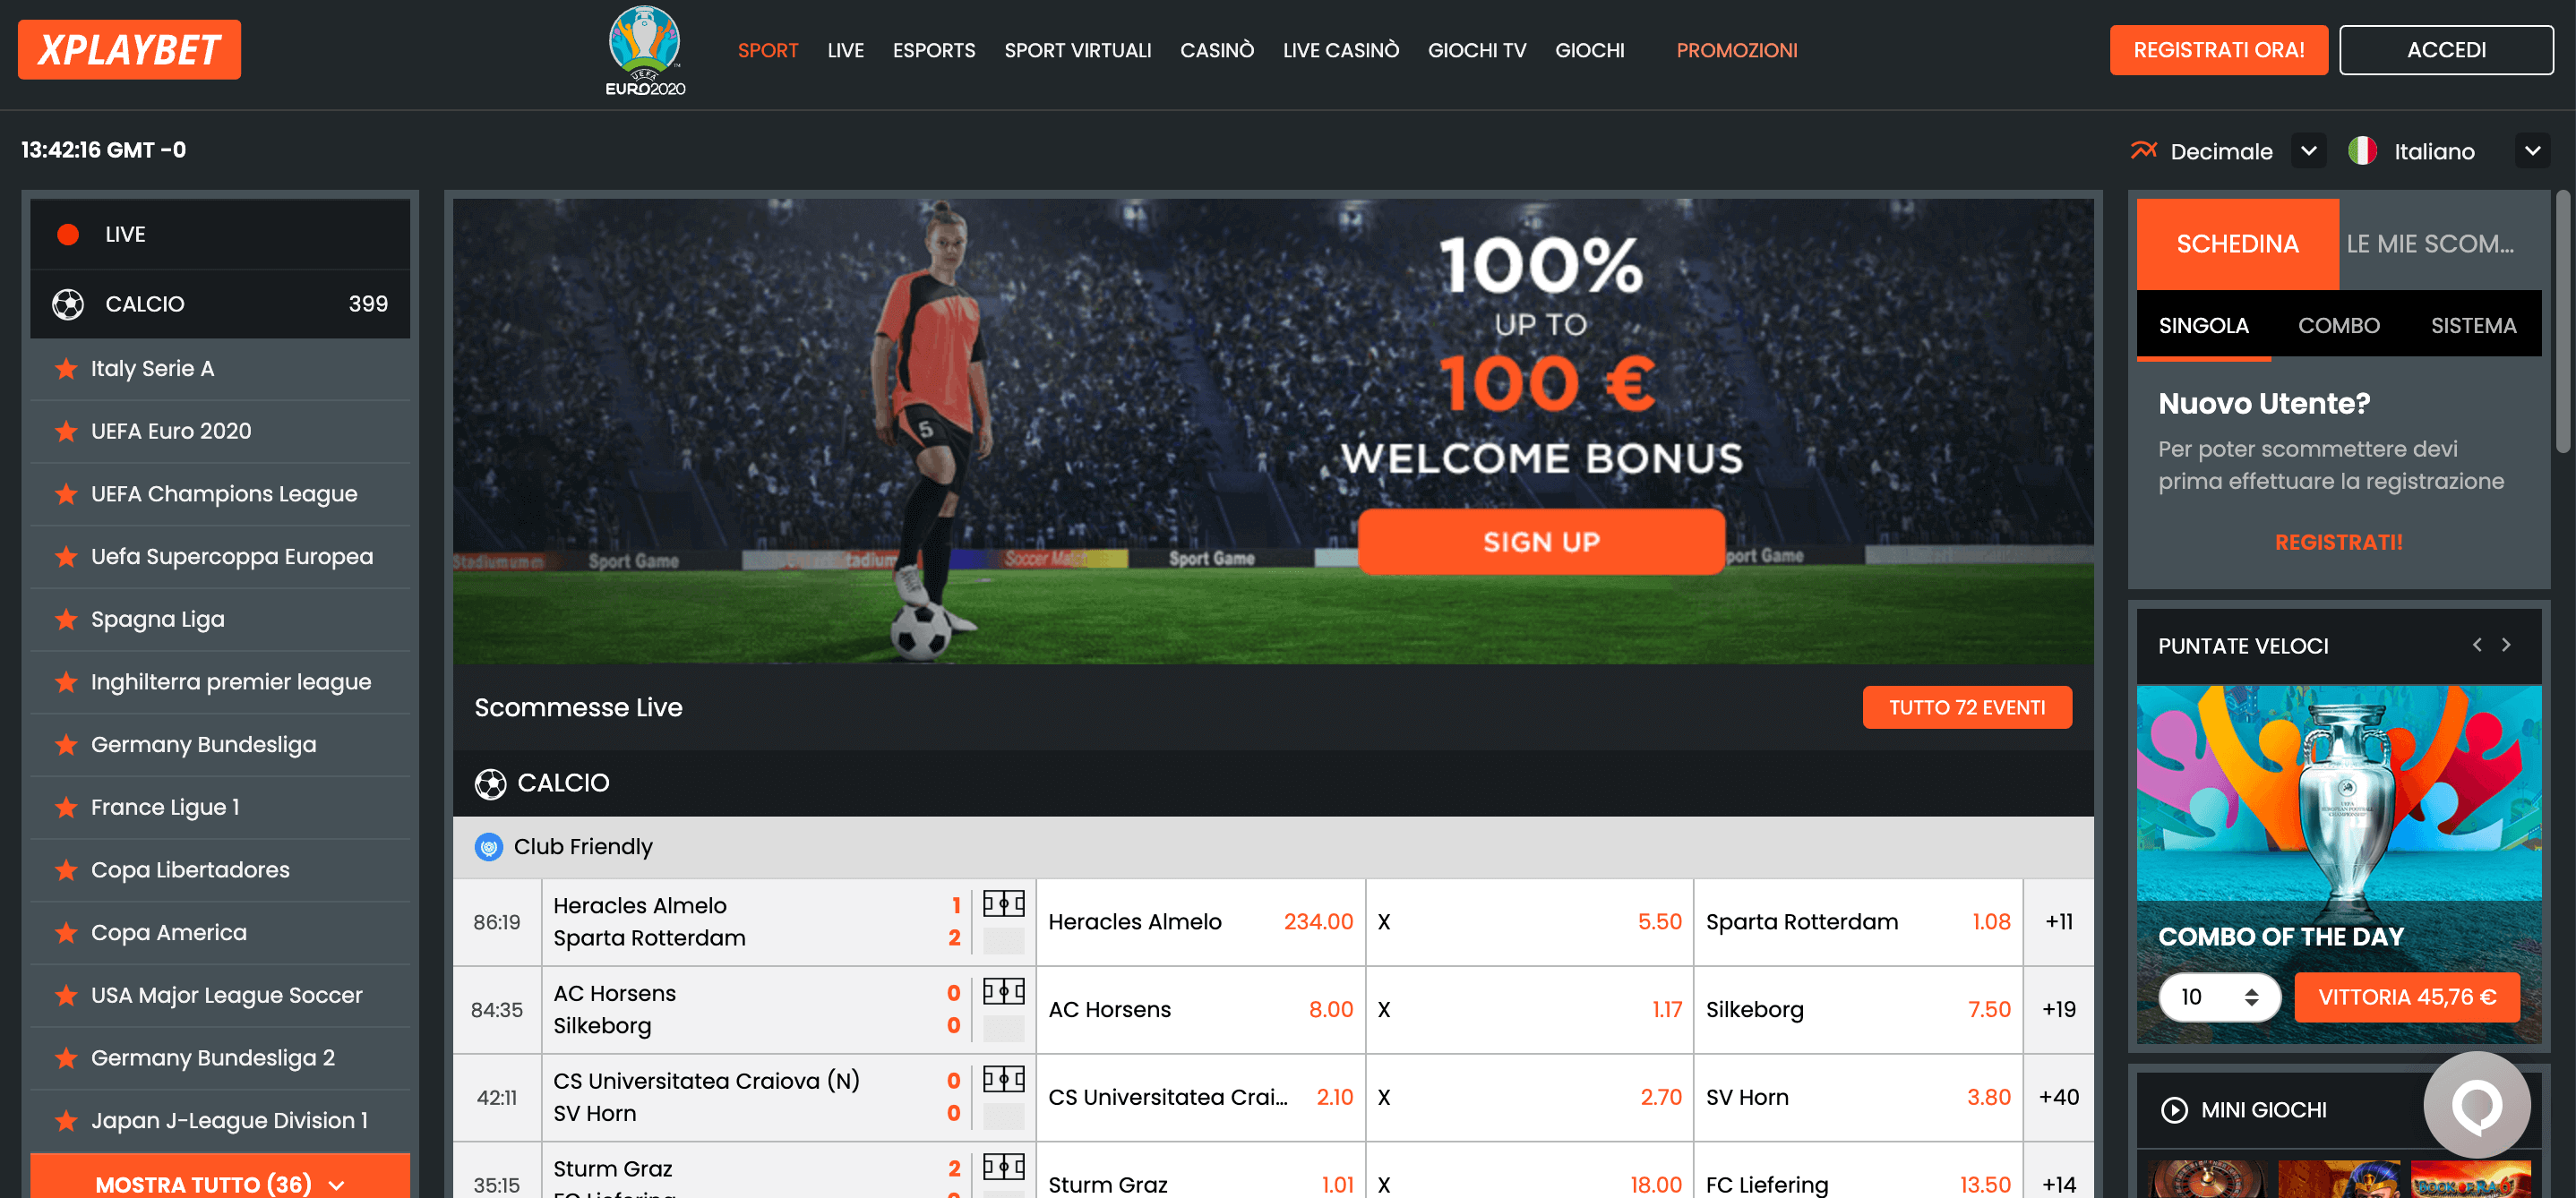 Xplaybet Home